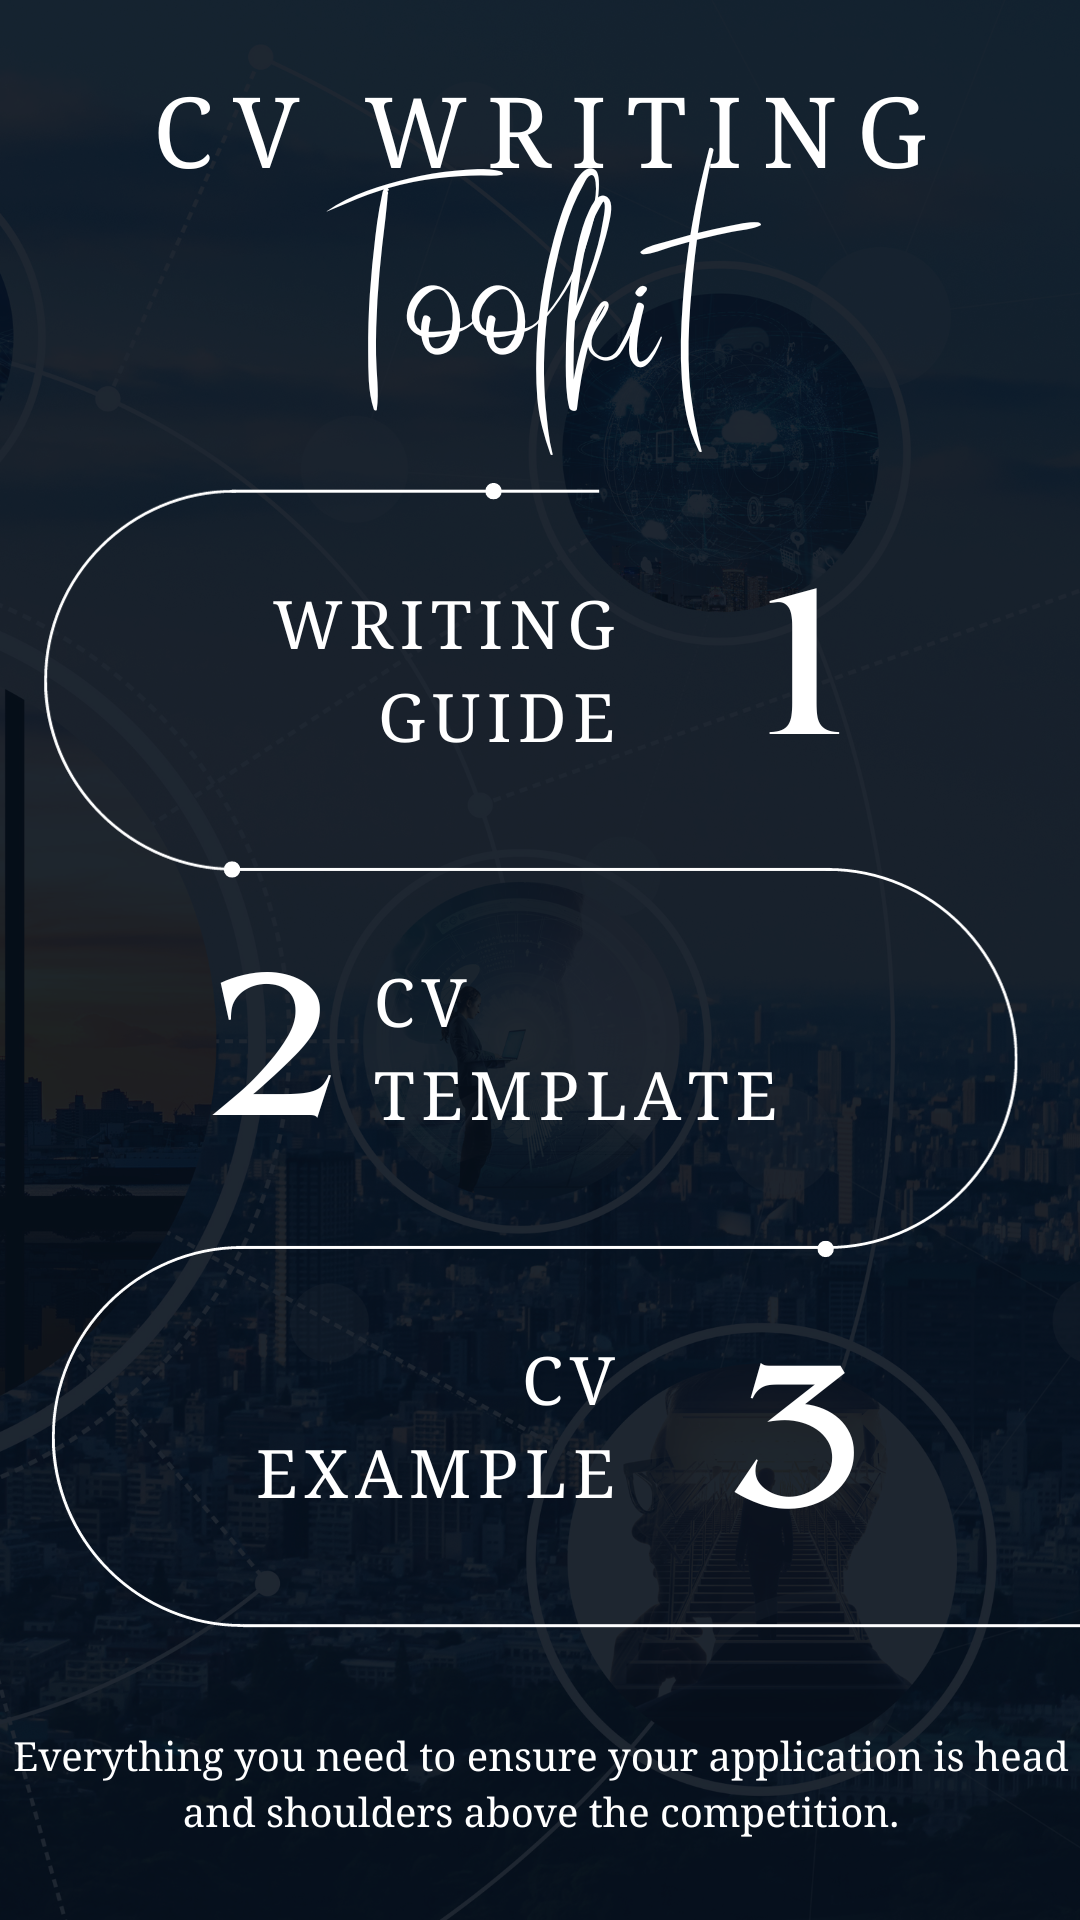 Product Owner CV Writing Toolkit